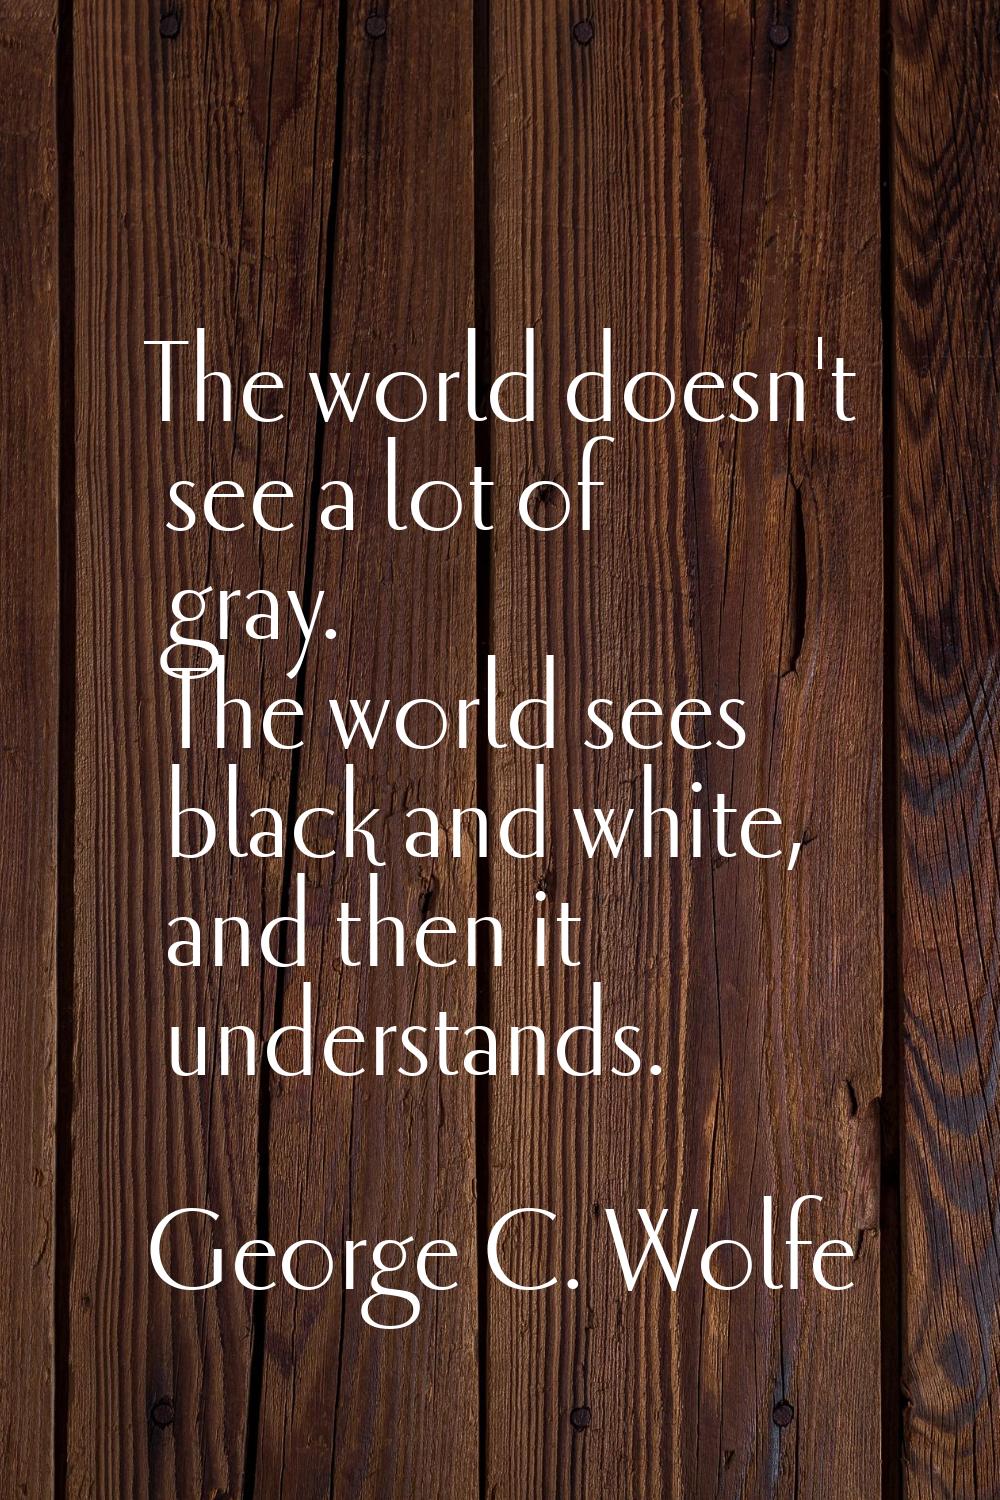 The world doesn't see a lot of gray. The world sees black and white, and then it understands.